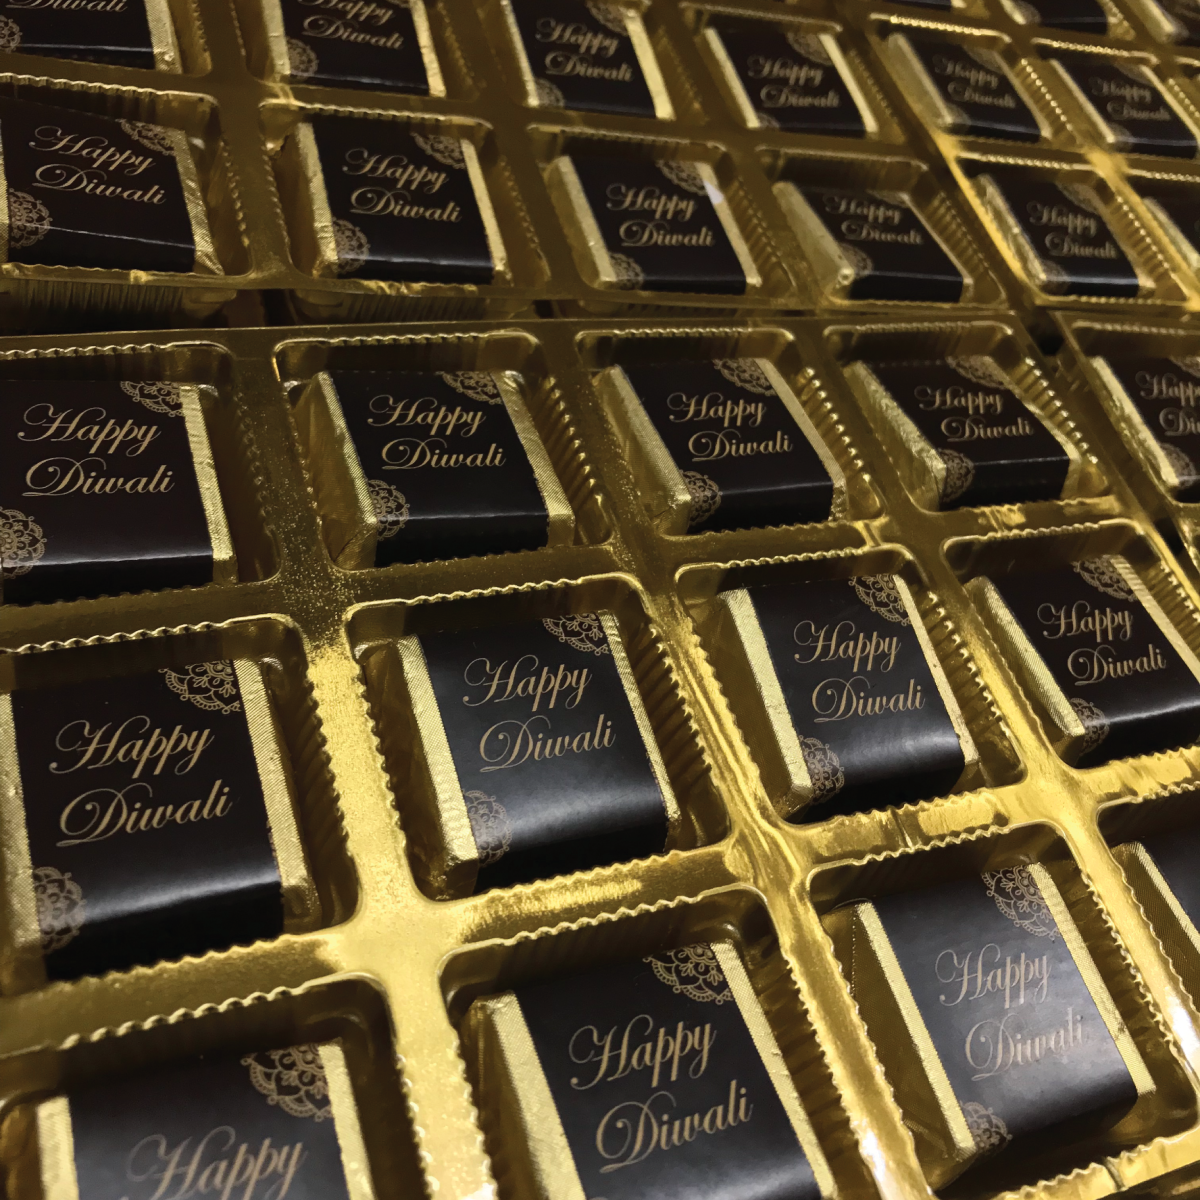 Imported Chocolate Bars Gift for Diwali – Chocolate Delivery Online